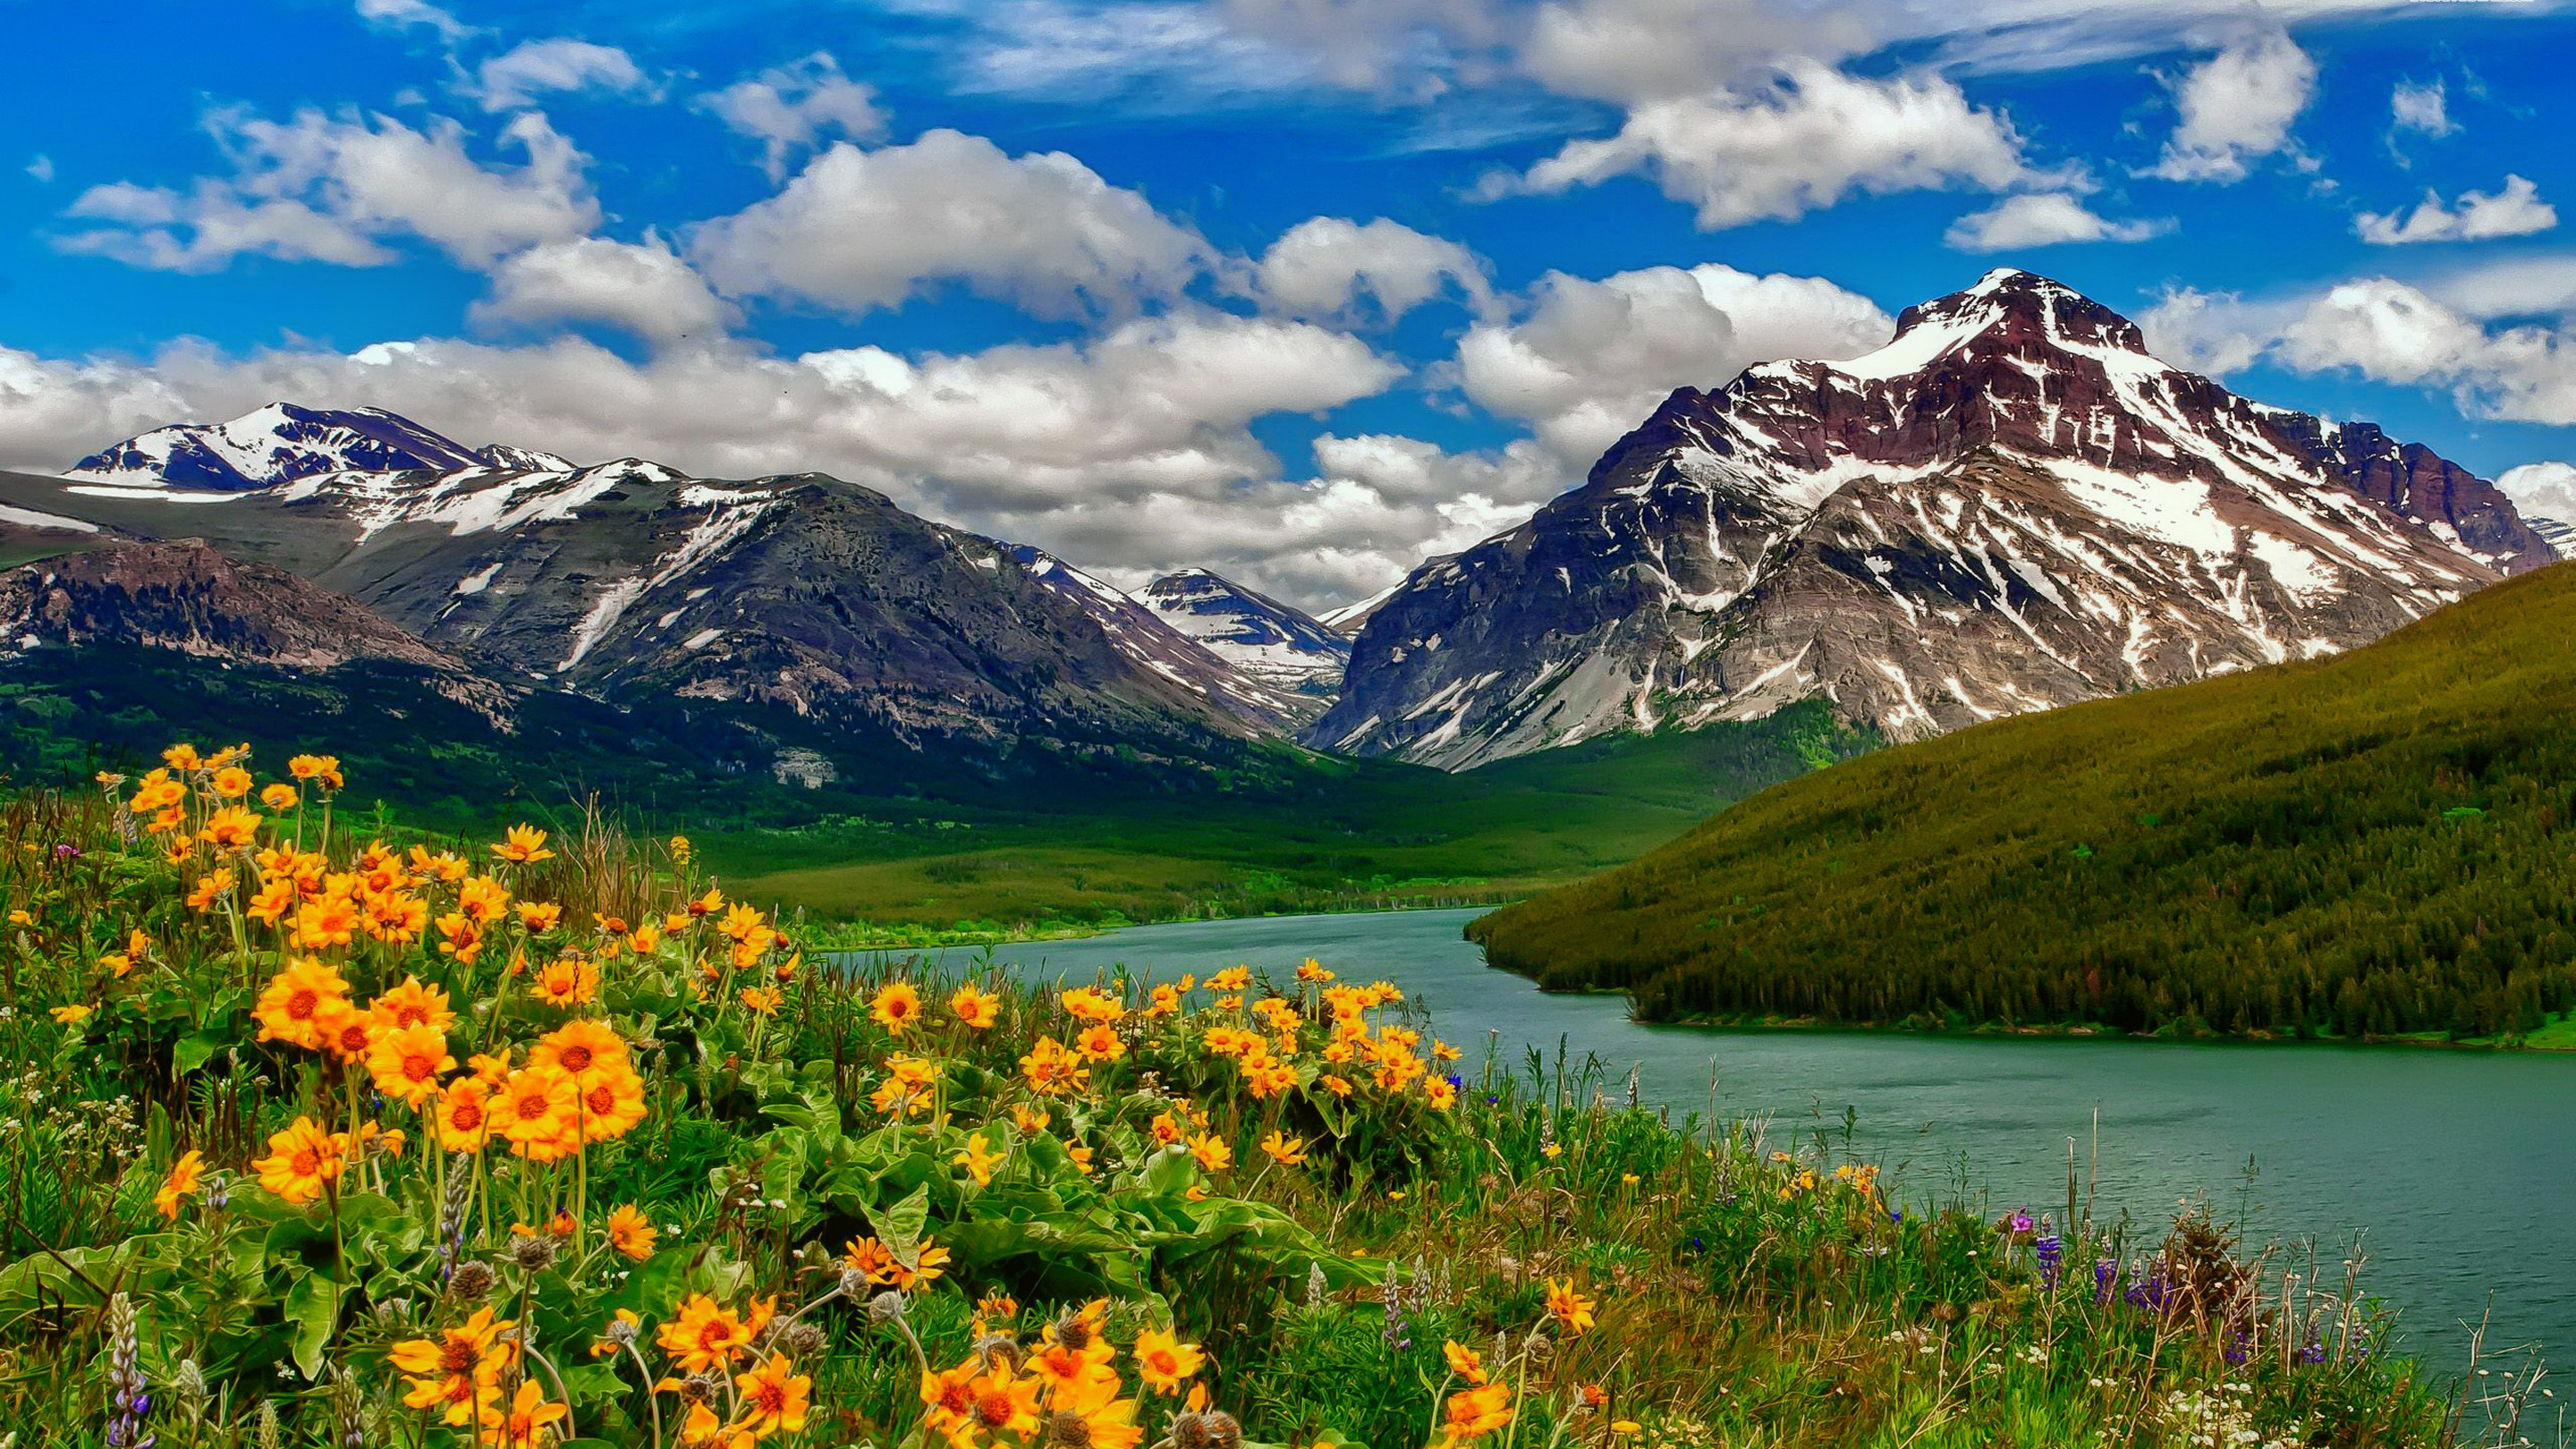 Spring Landscape Wild Flowers Yellow Color Lake Mountains With Remains Of Snow HD Desktop Wallpaper 2880x1620, Wallpaper13.com